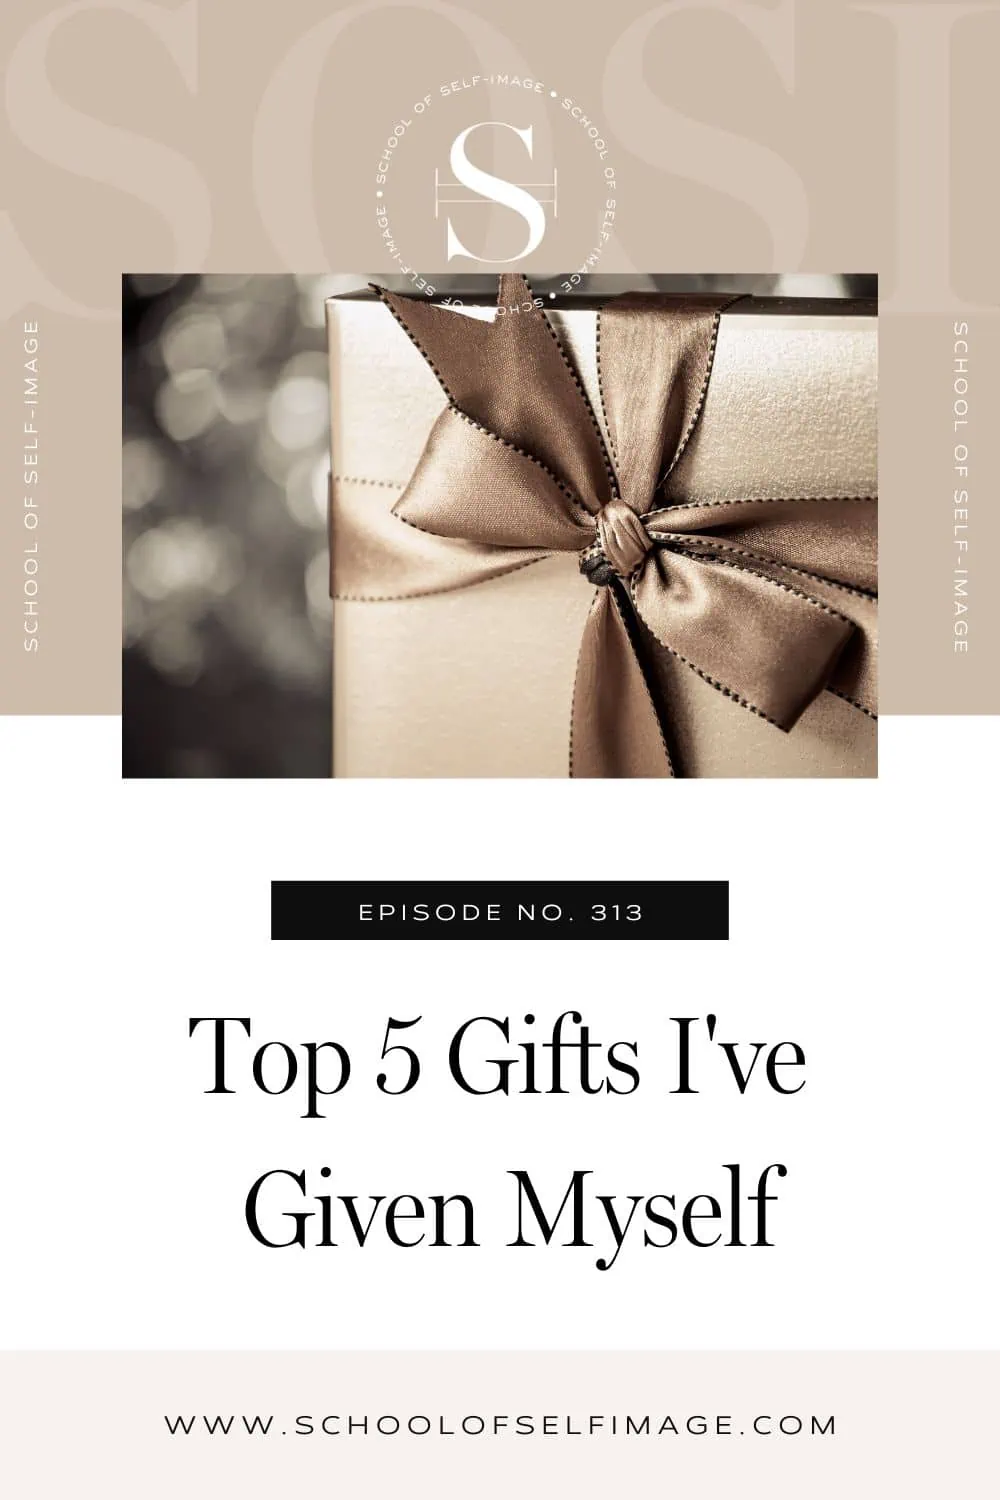 Top 5 Gifts I've Given Myself